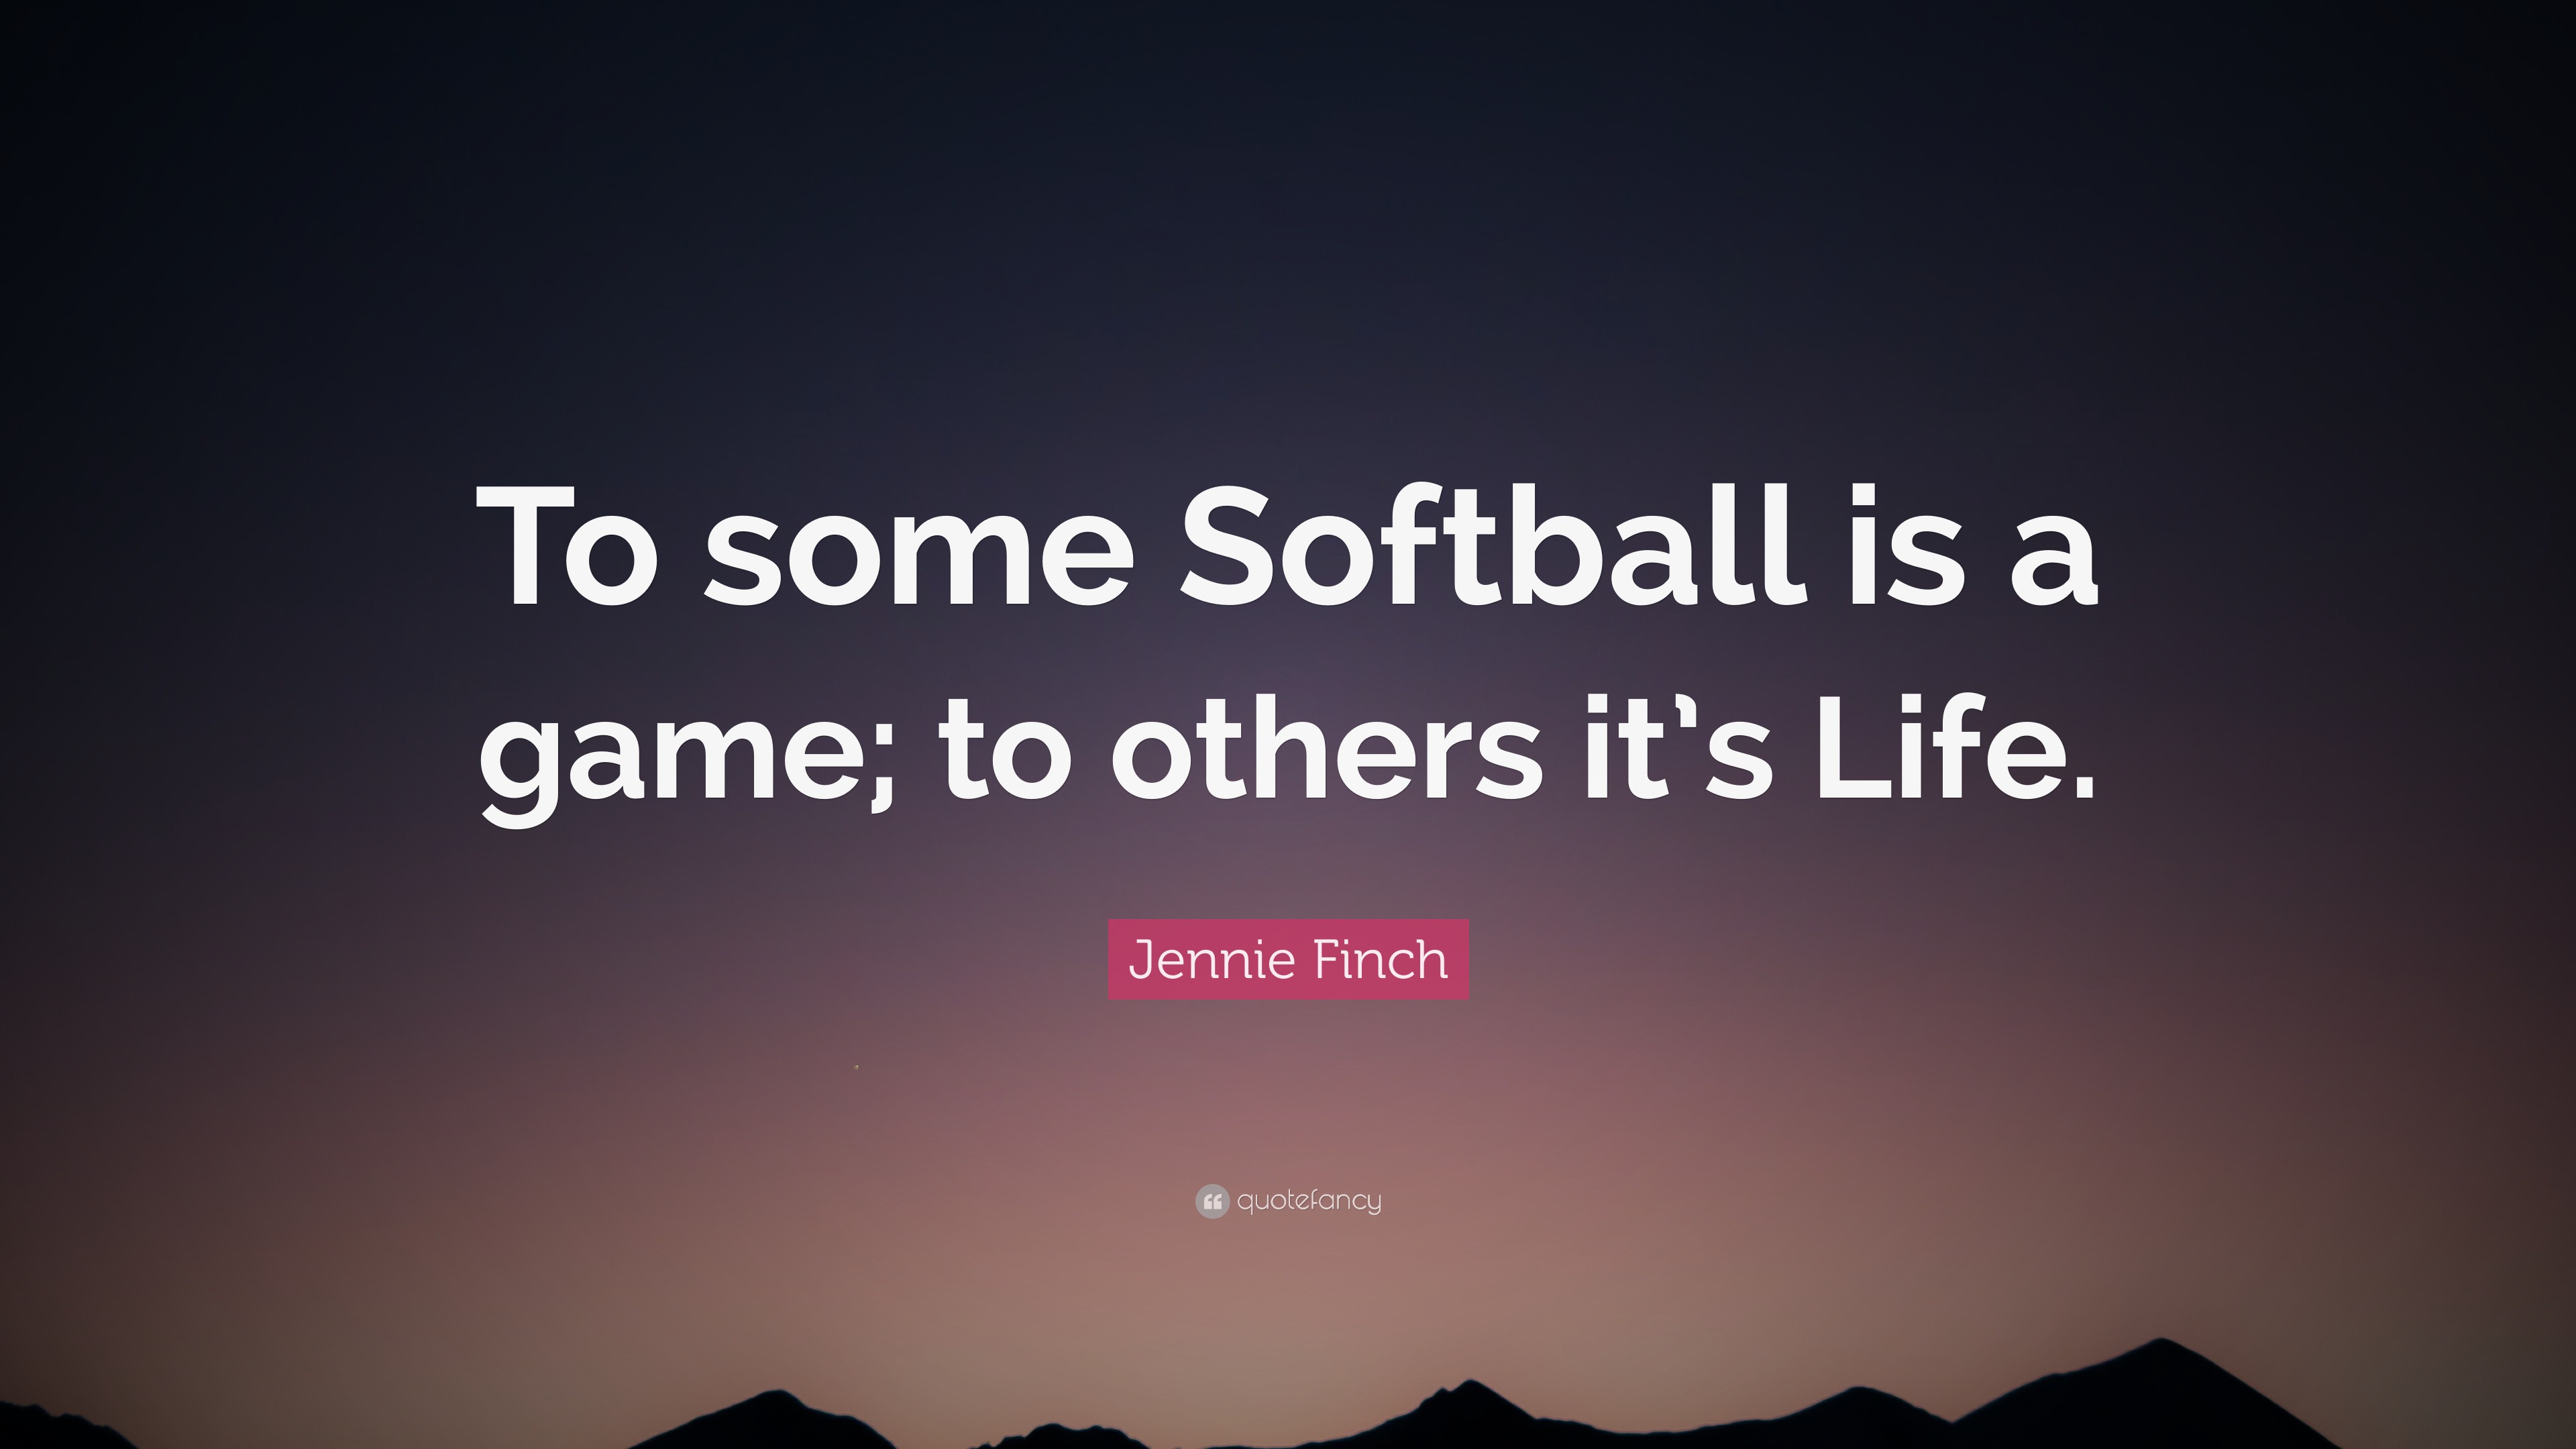 Jennie Finch Quote: “To some Softball is a game; to others it’s Life.”